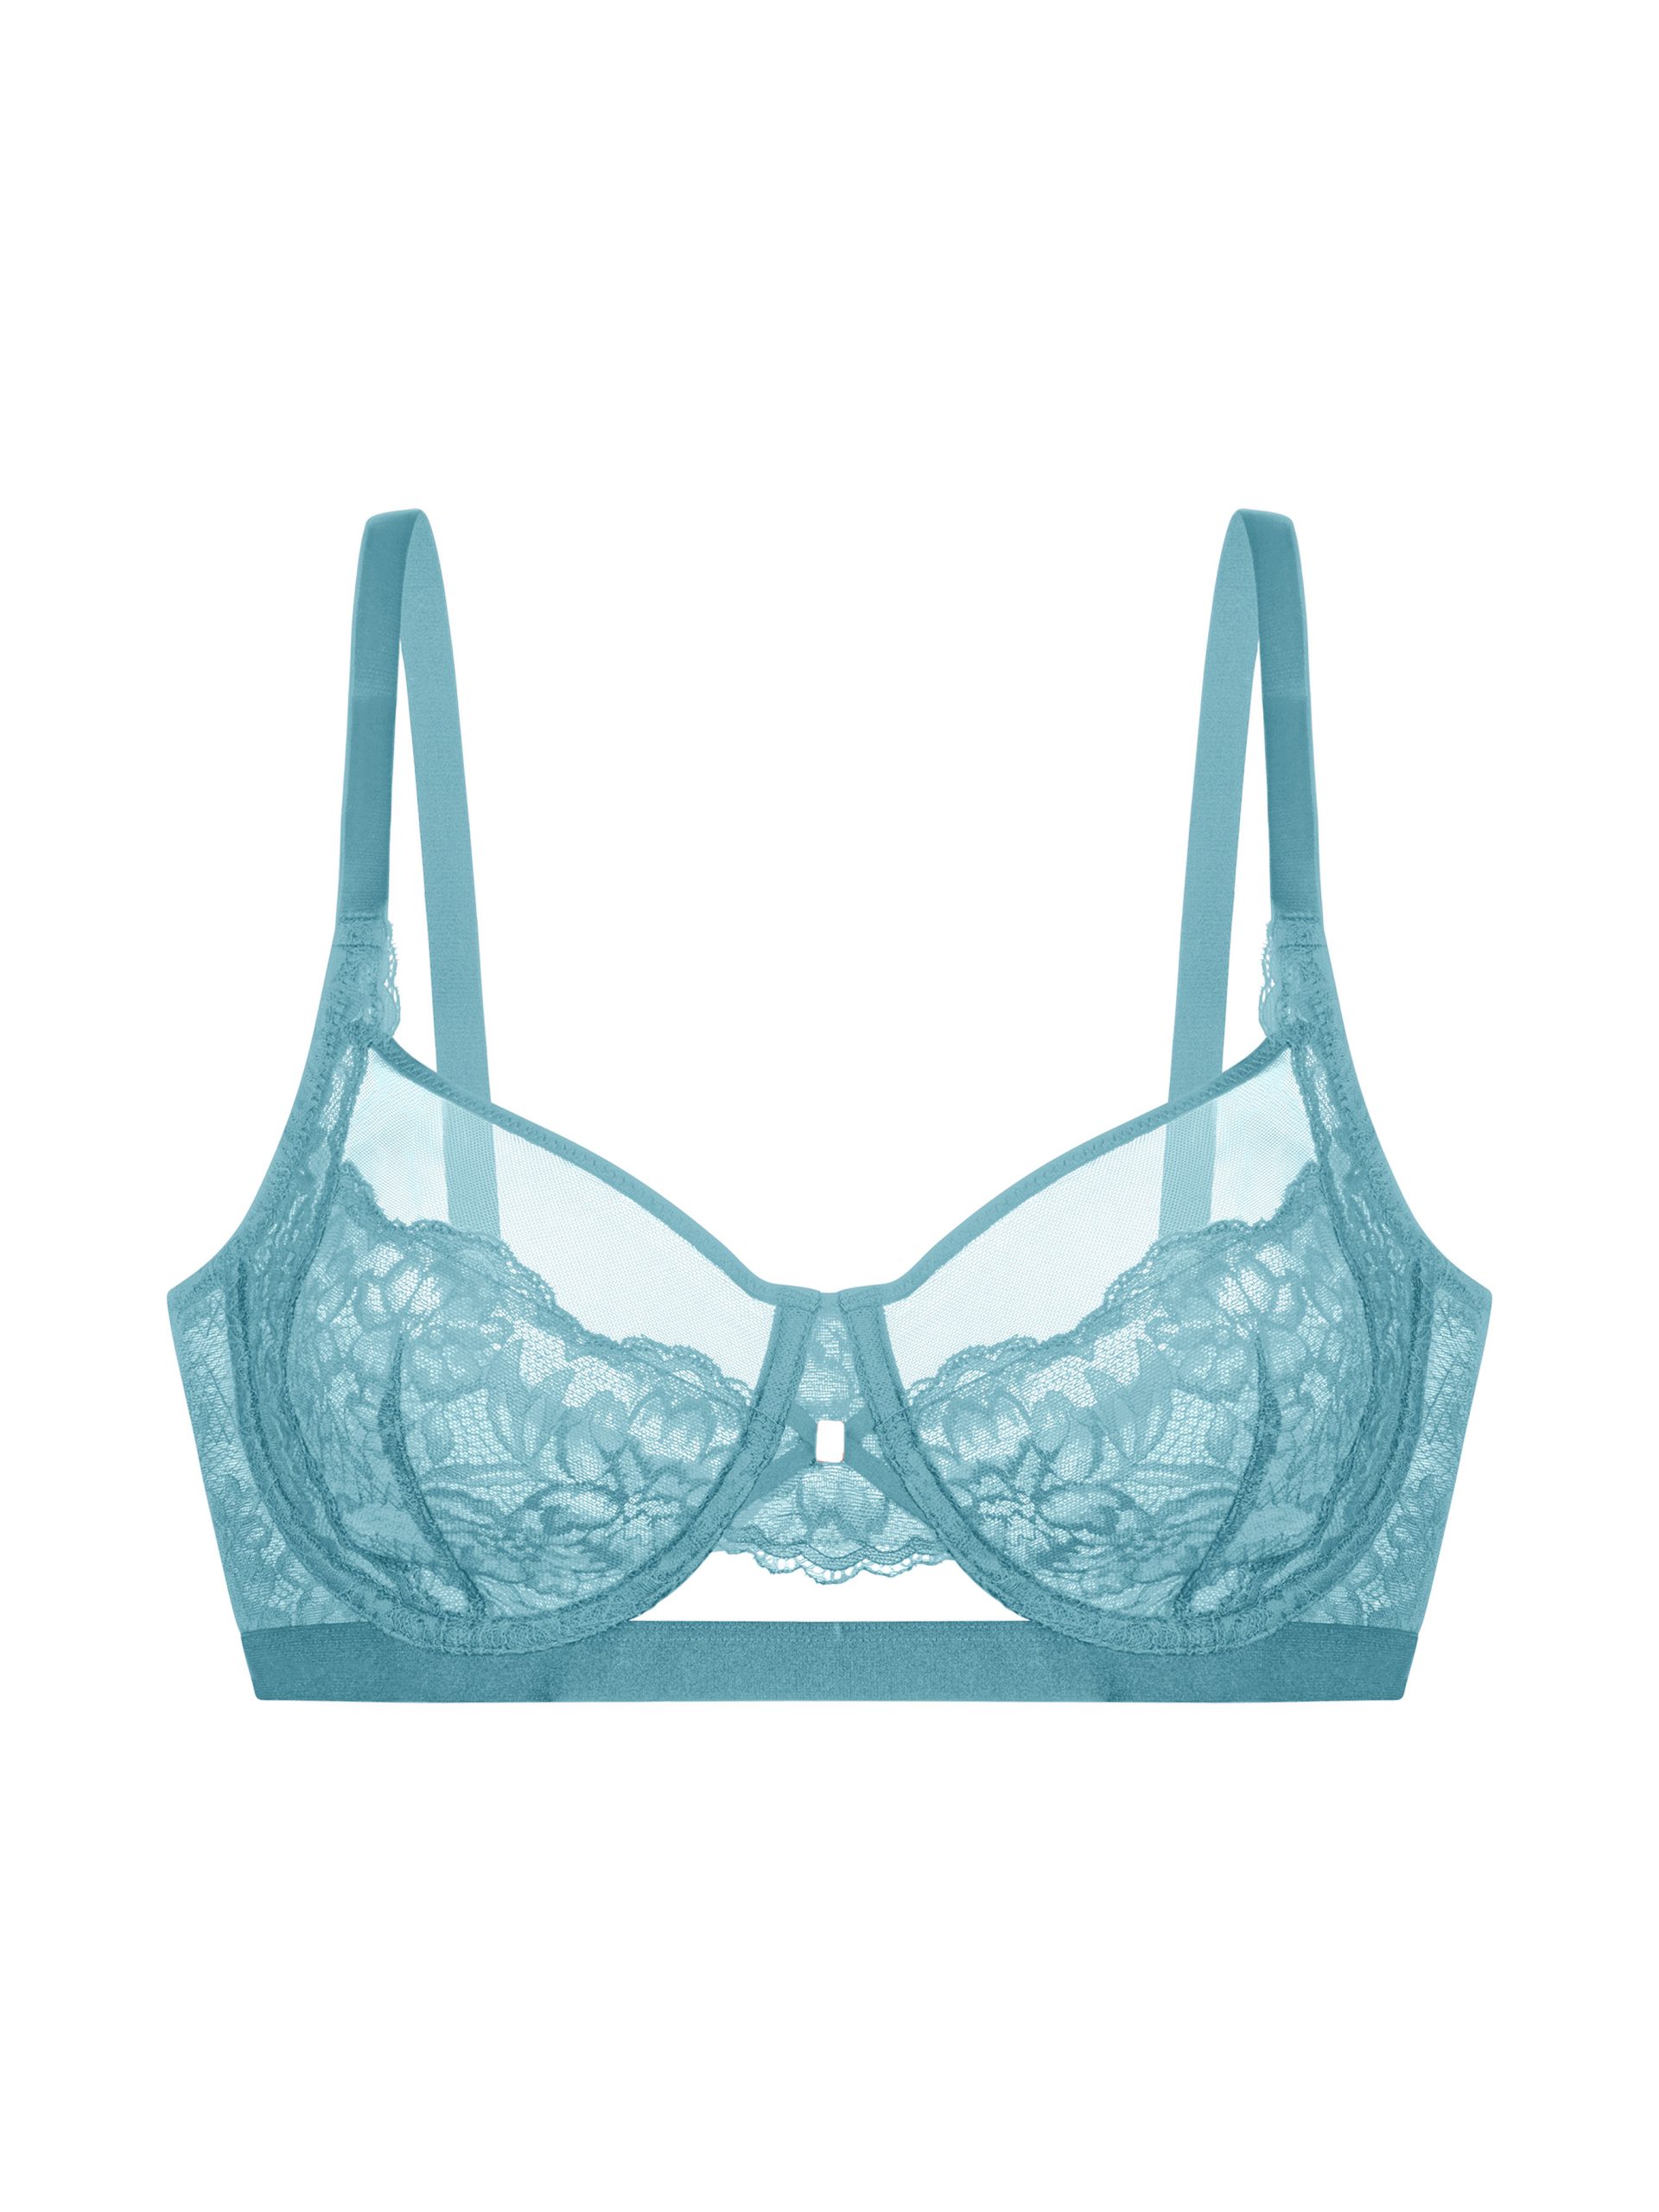 Lyra Seamless printed Stretchable Non Padded Bra 513 For Women pack of 2